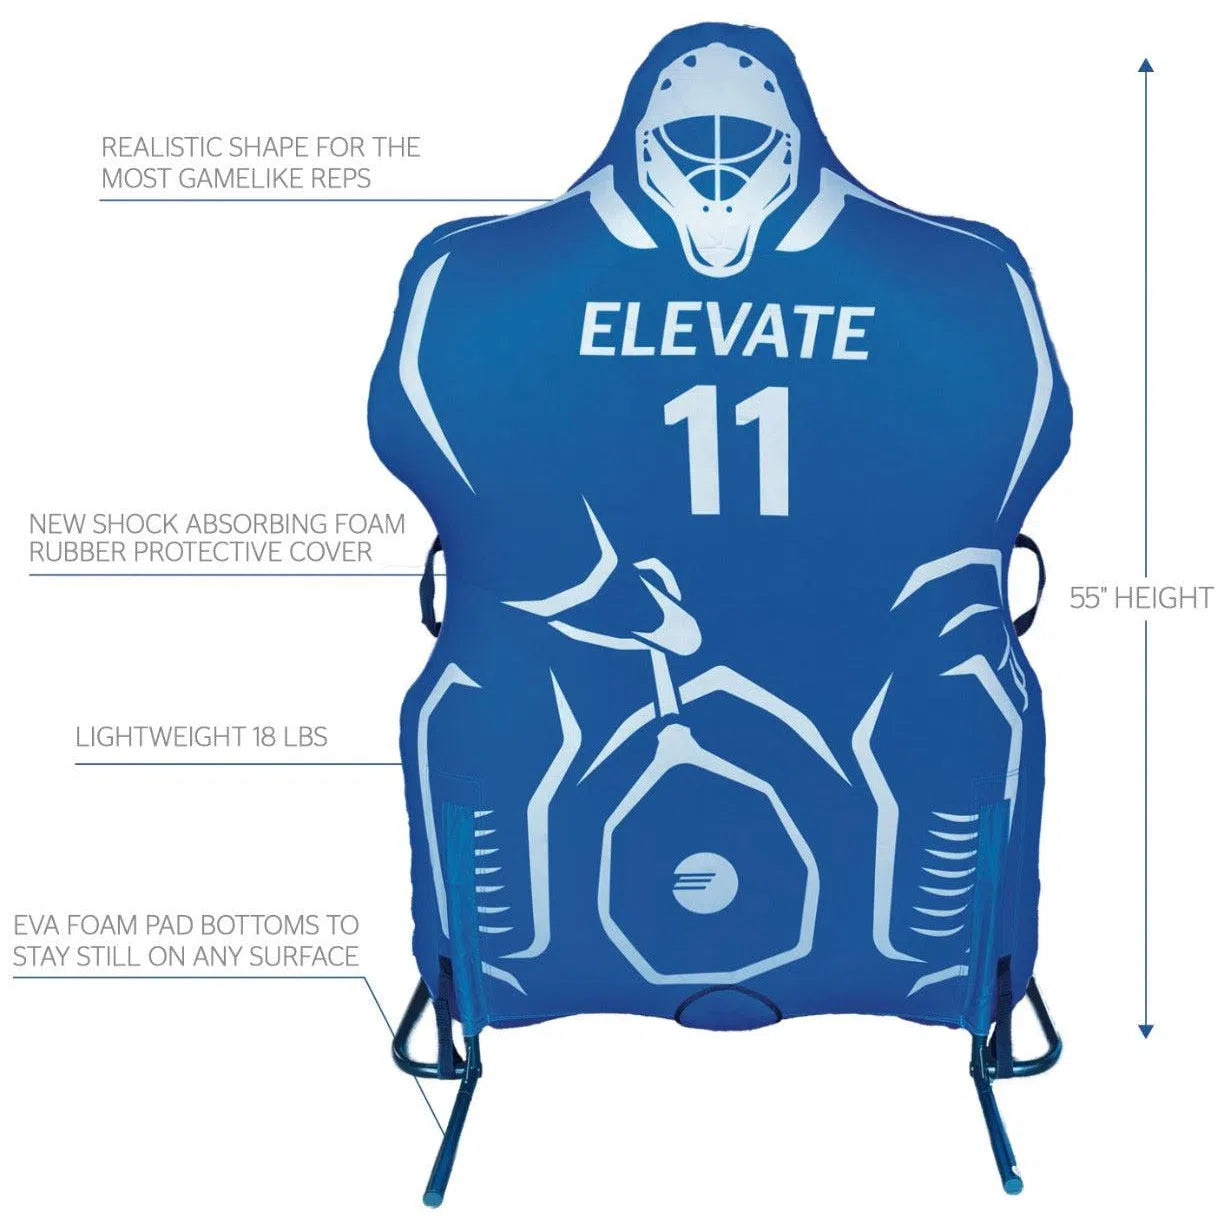 Elevate Sports 11th Man Box Goalie - Inflatable Lacrosse Dummy